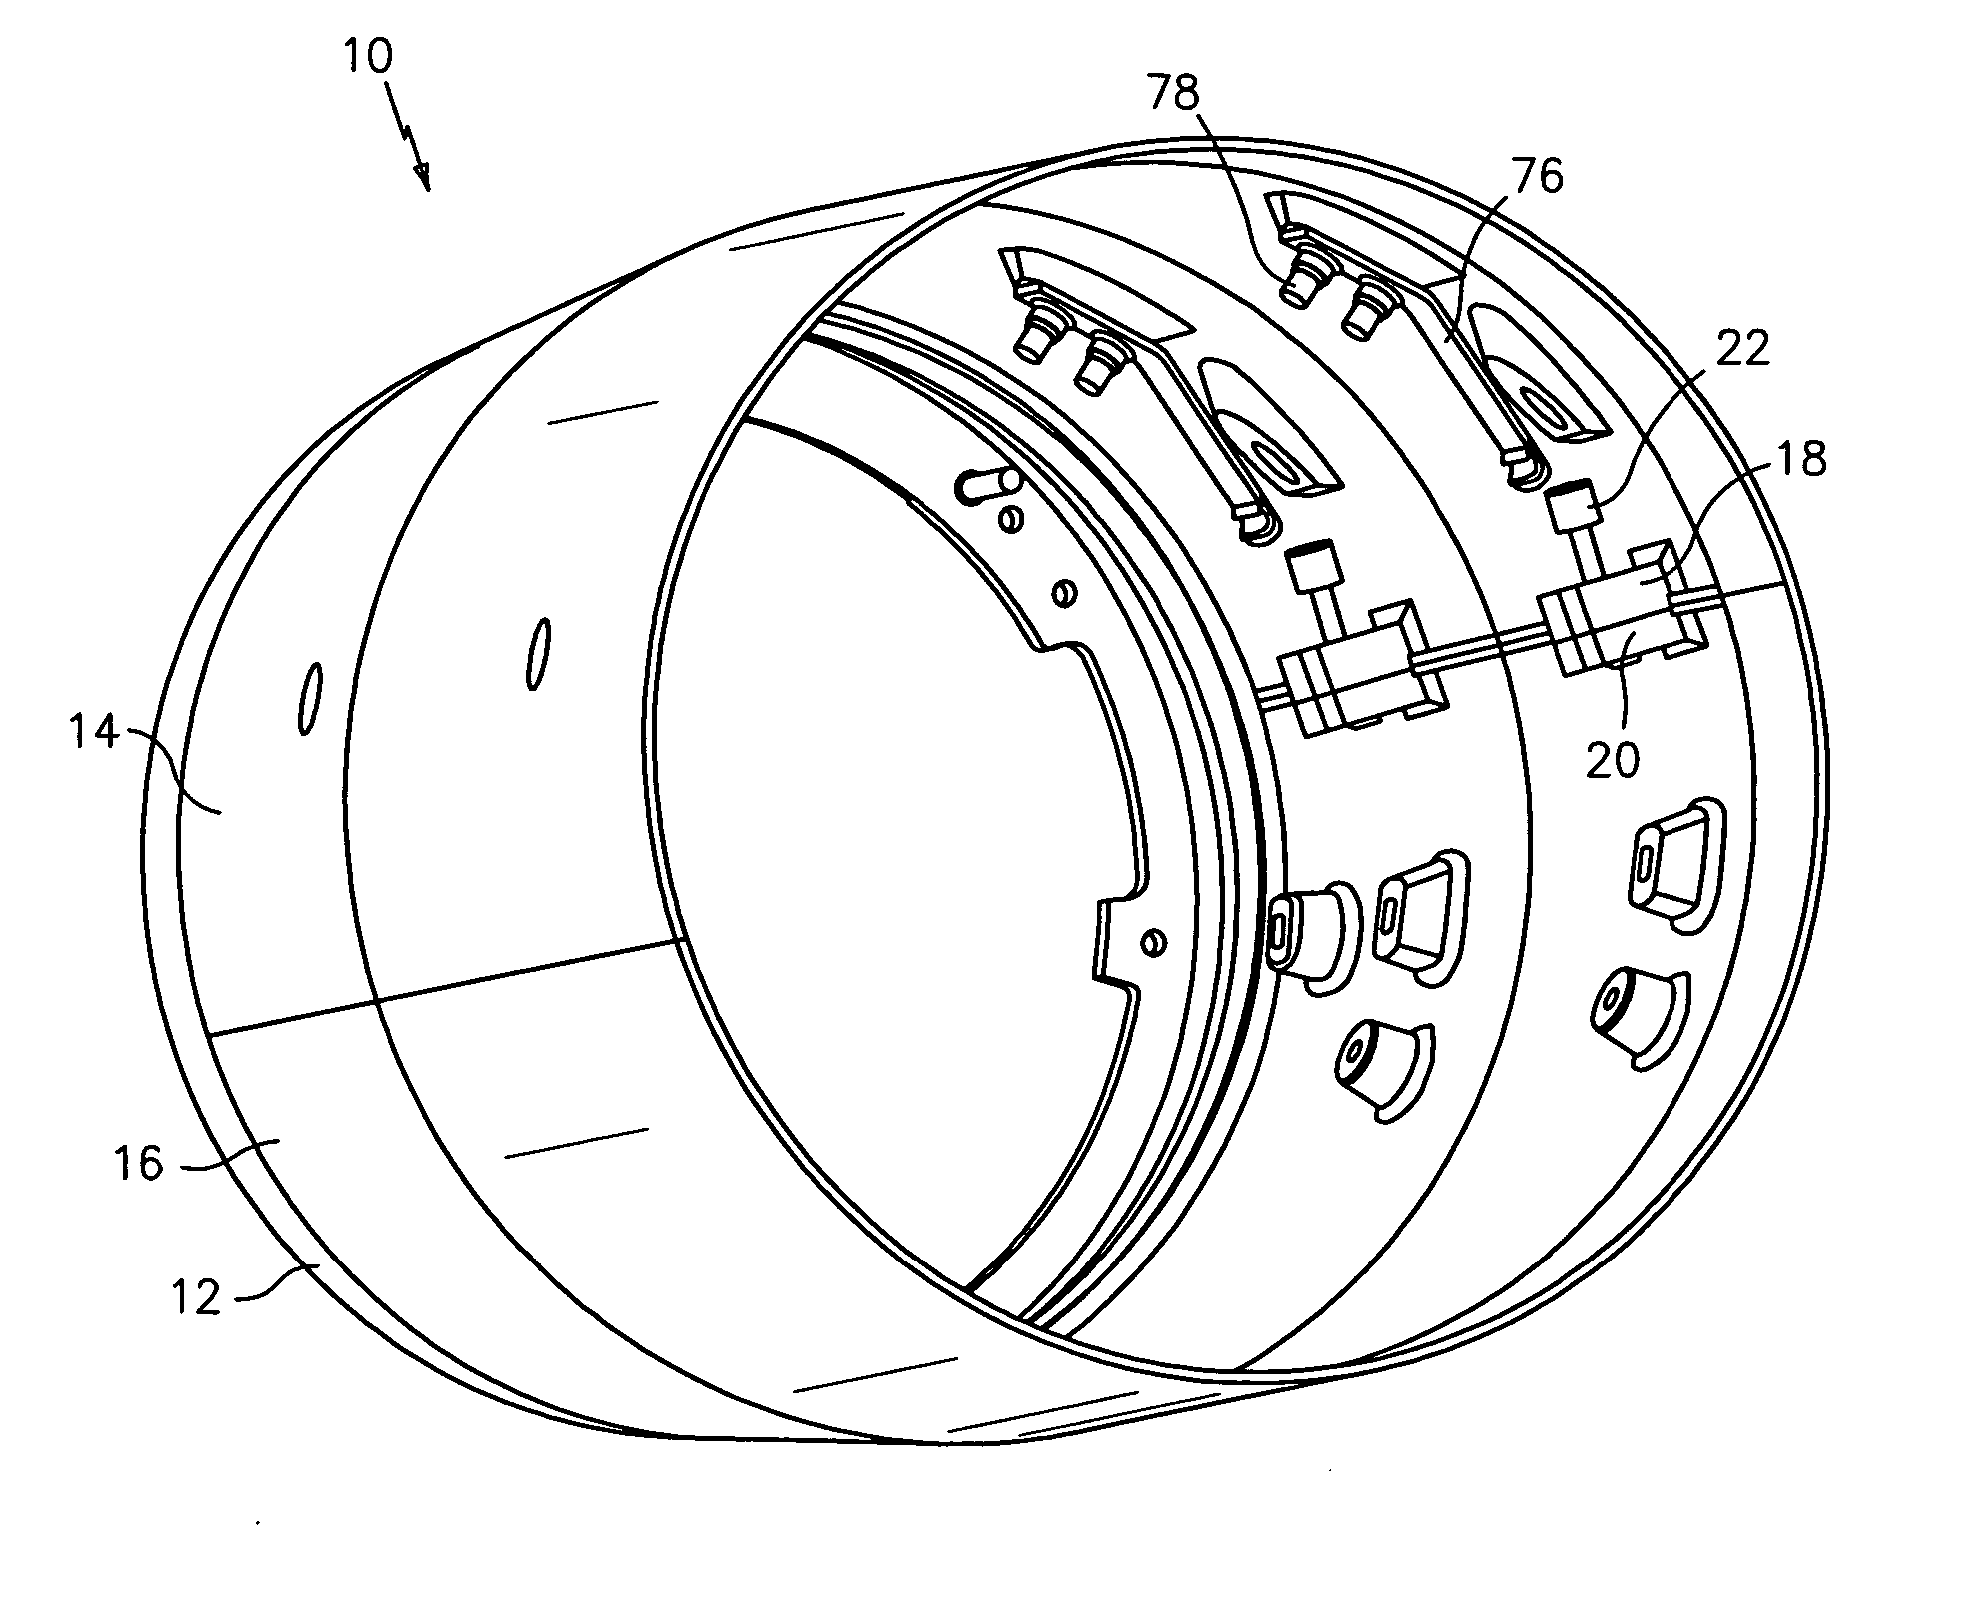 Split flange V-groove and anti-rotation mating system